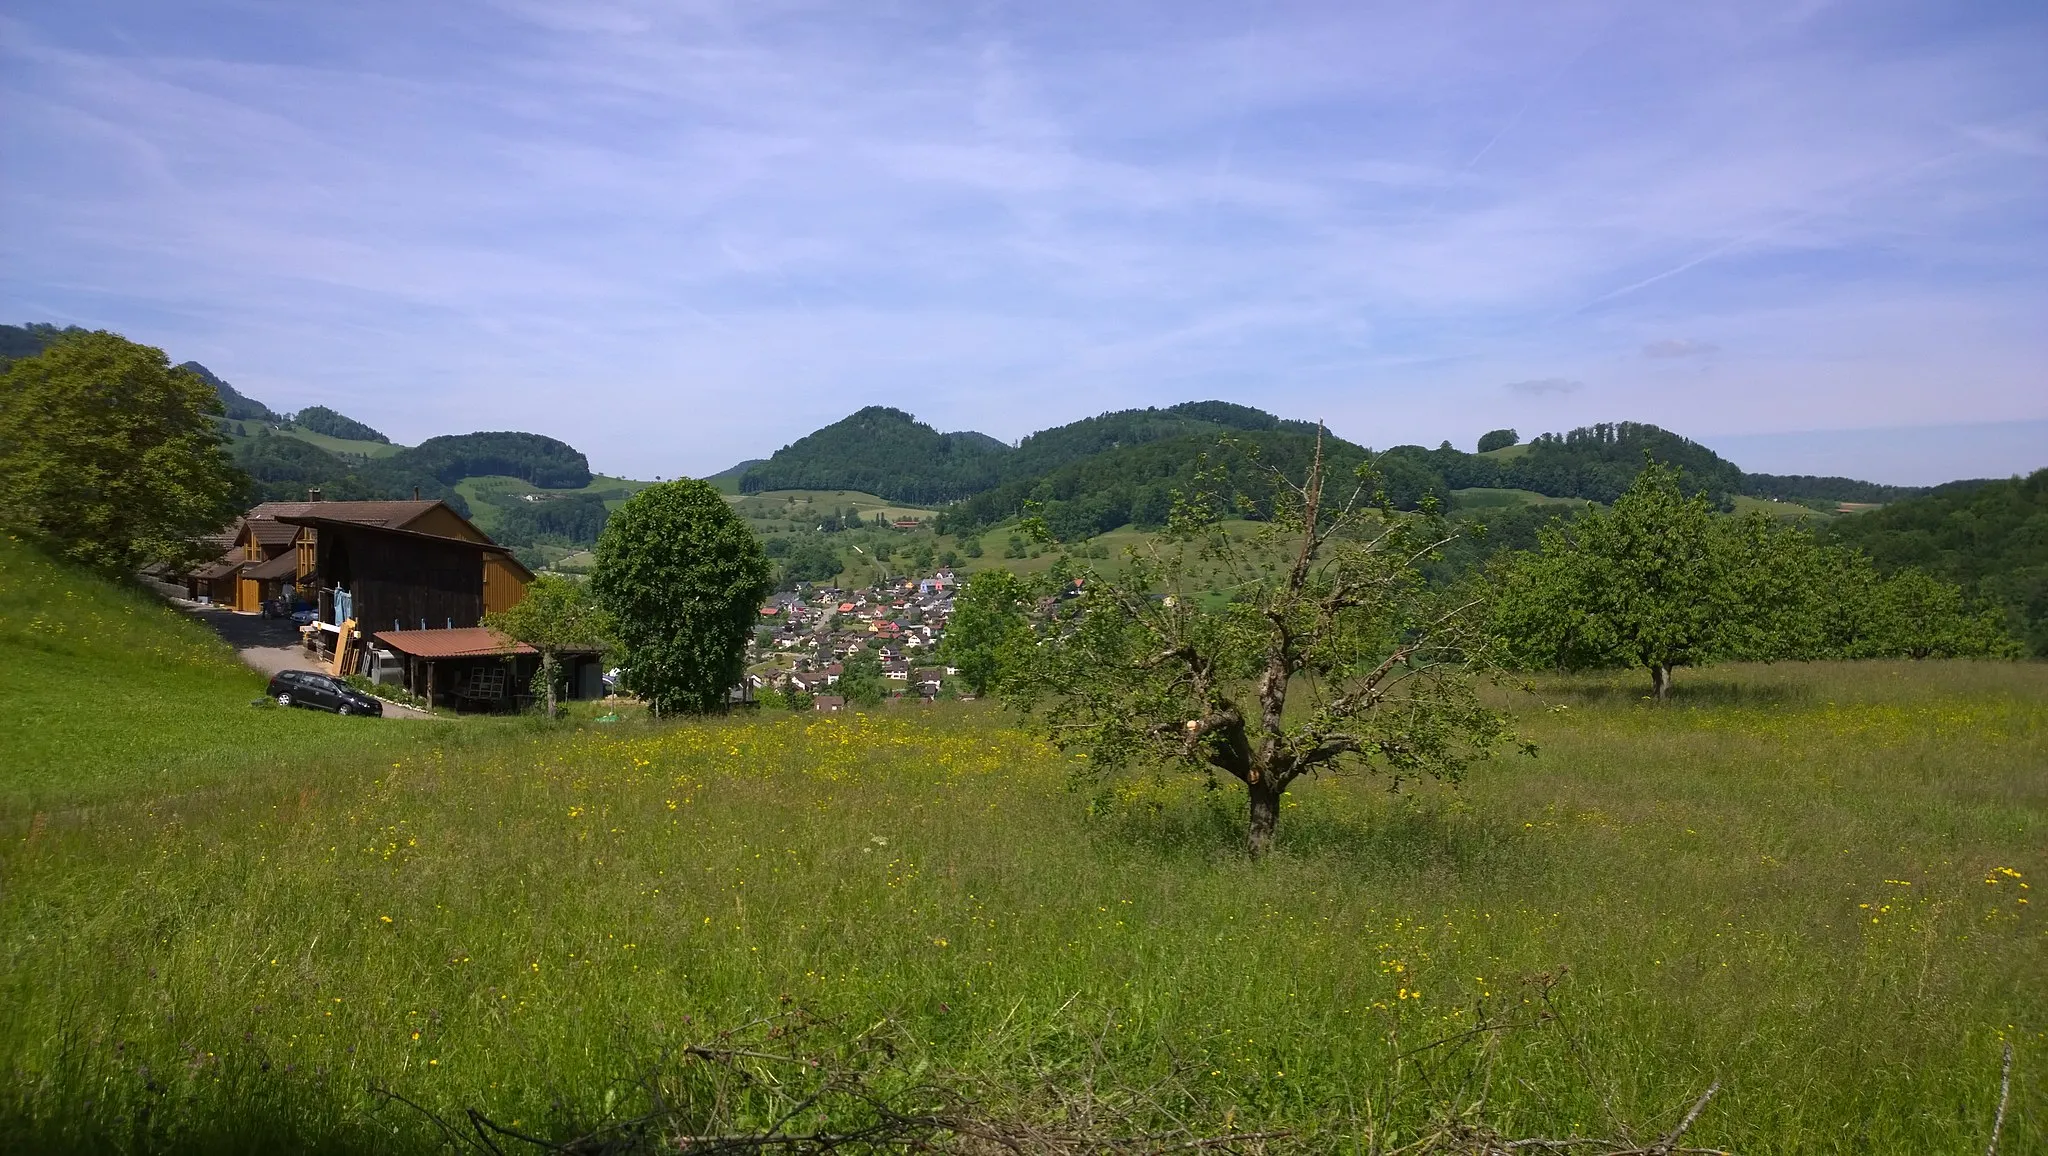 Photo showing: The municipality of Reigoldswil from a nearby hill, taken in May 2015.